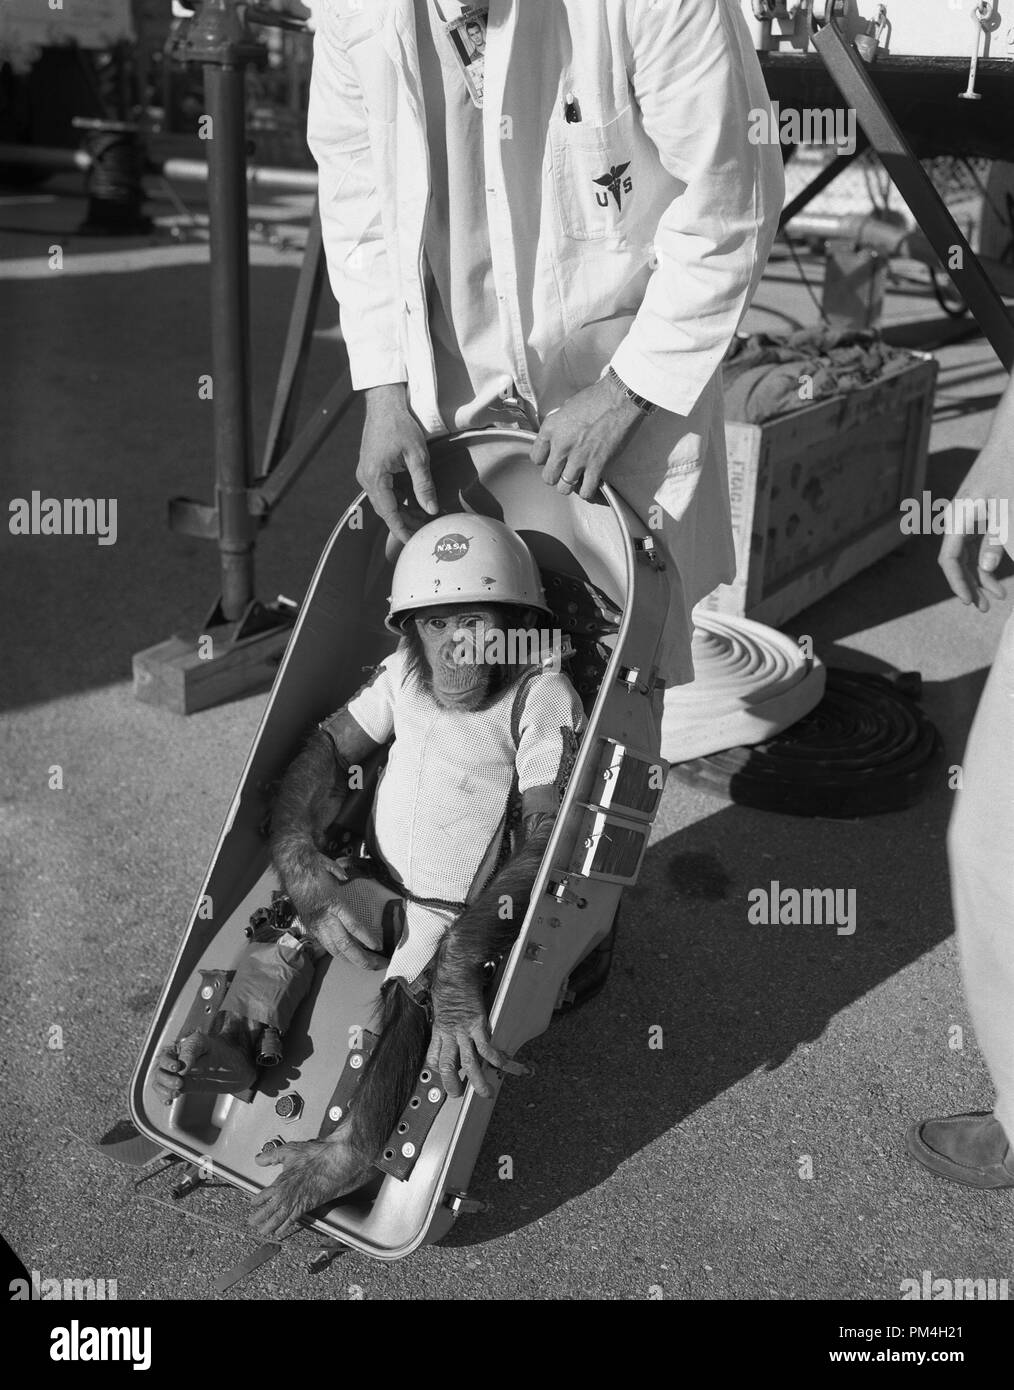 (31 Jan. 1961) --- Primate chimpanzee Ham, in his spacesuit, is fitted into the couch of the Mercury-Redstone 2 (MR-2) capsule #5 prior to its test flight which was conducted on Jan. 31, 1961.  File Reference # 1003 184THA Stock Photo